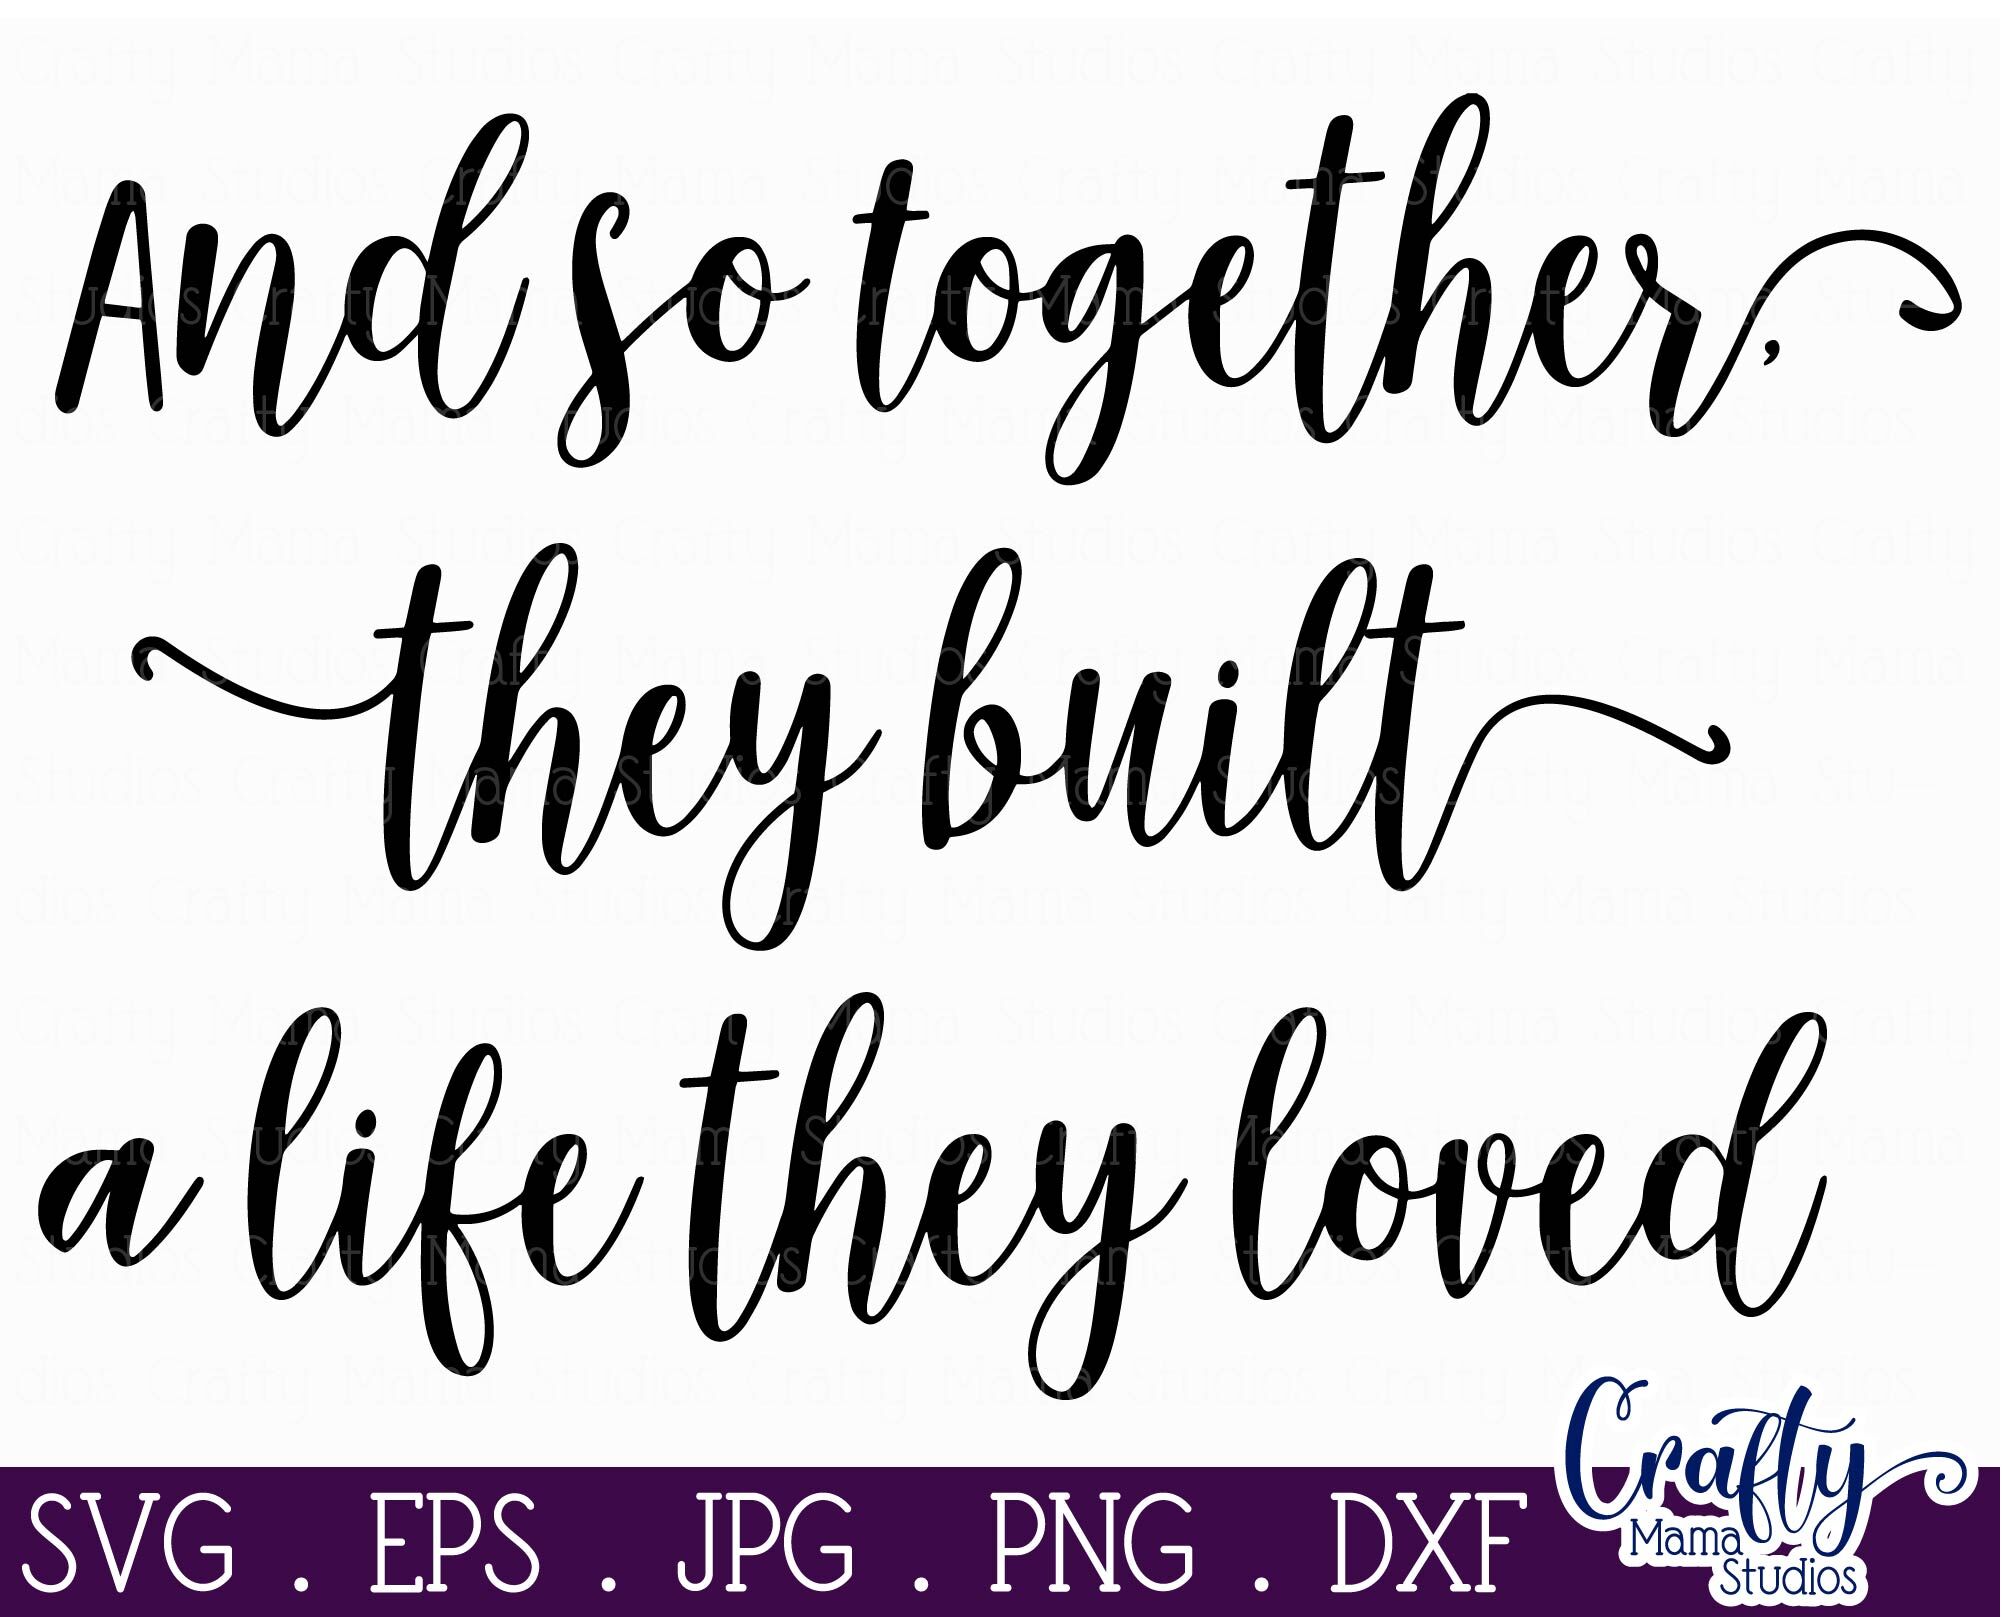 Svg File Together They Built A Life They Loved Visual Arts Craft Supplies Tools Kromasol Com